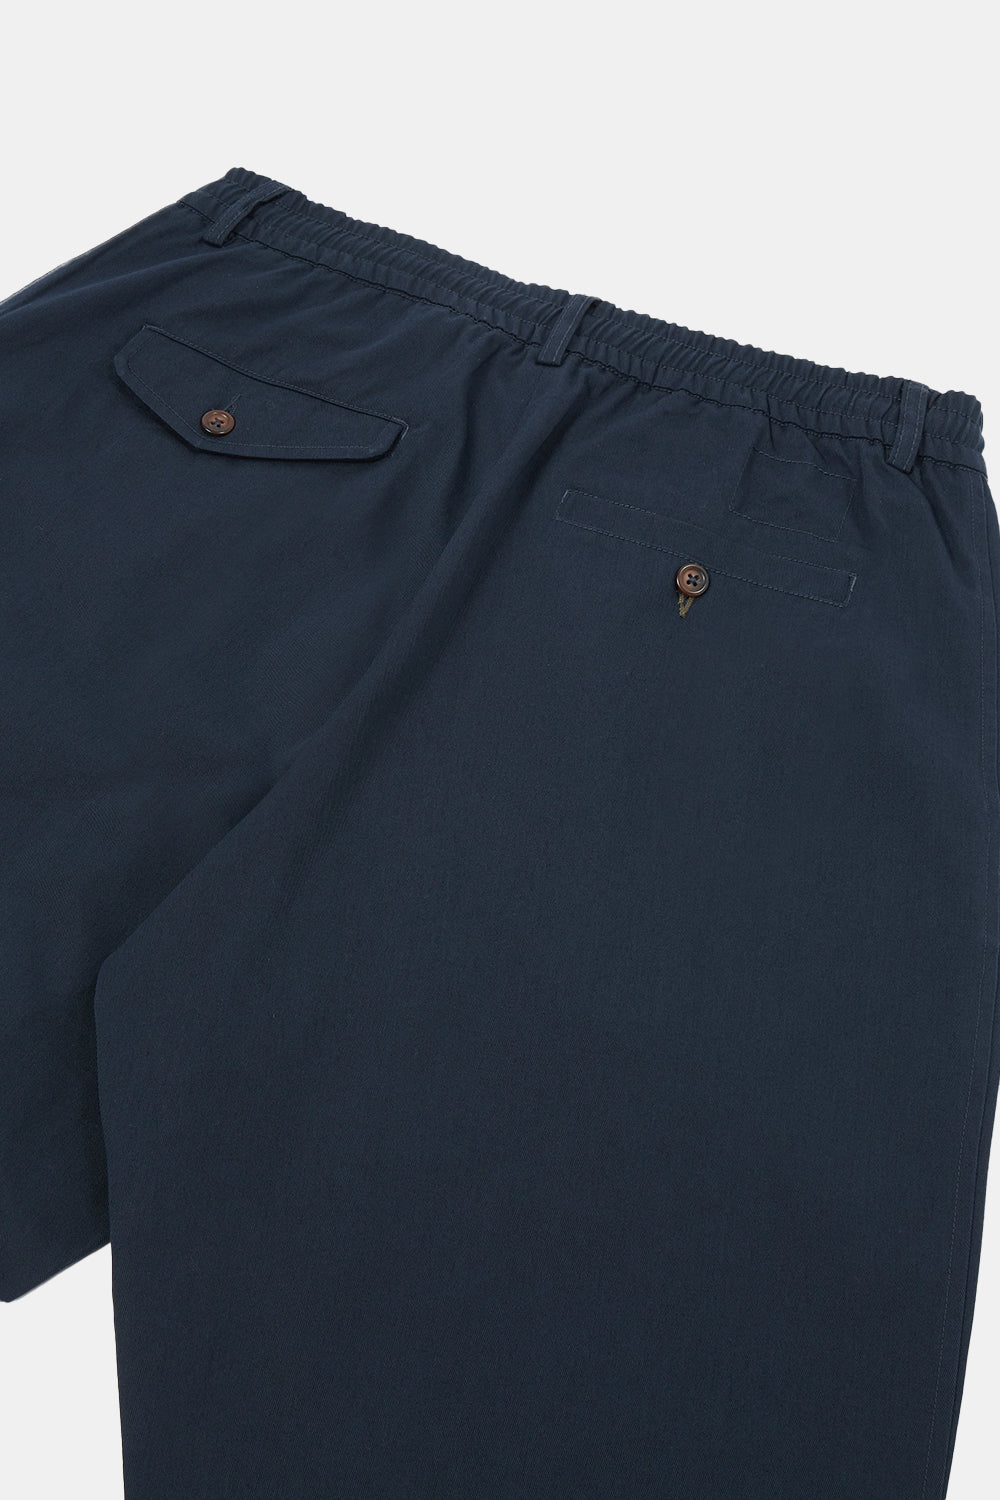 Universal Works Pleated Track Pant (Navy Twill) | Number Six